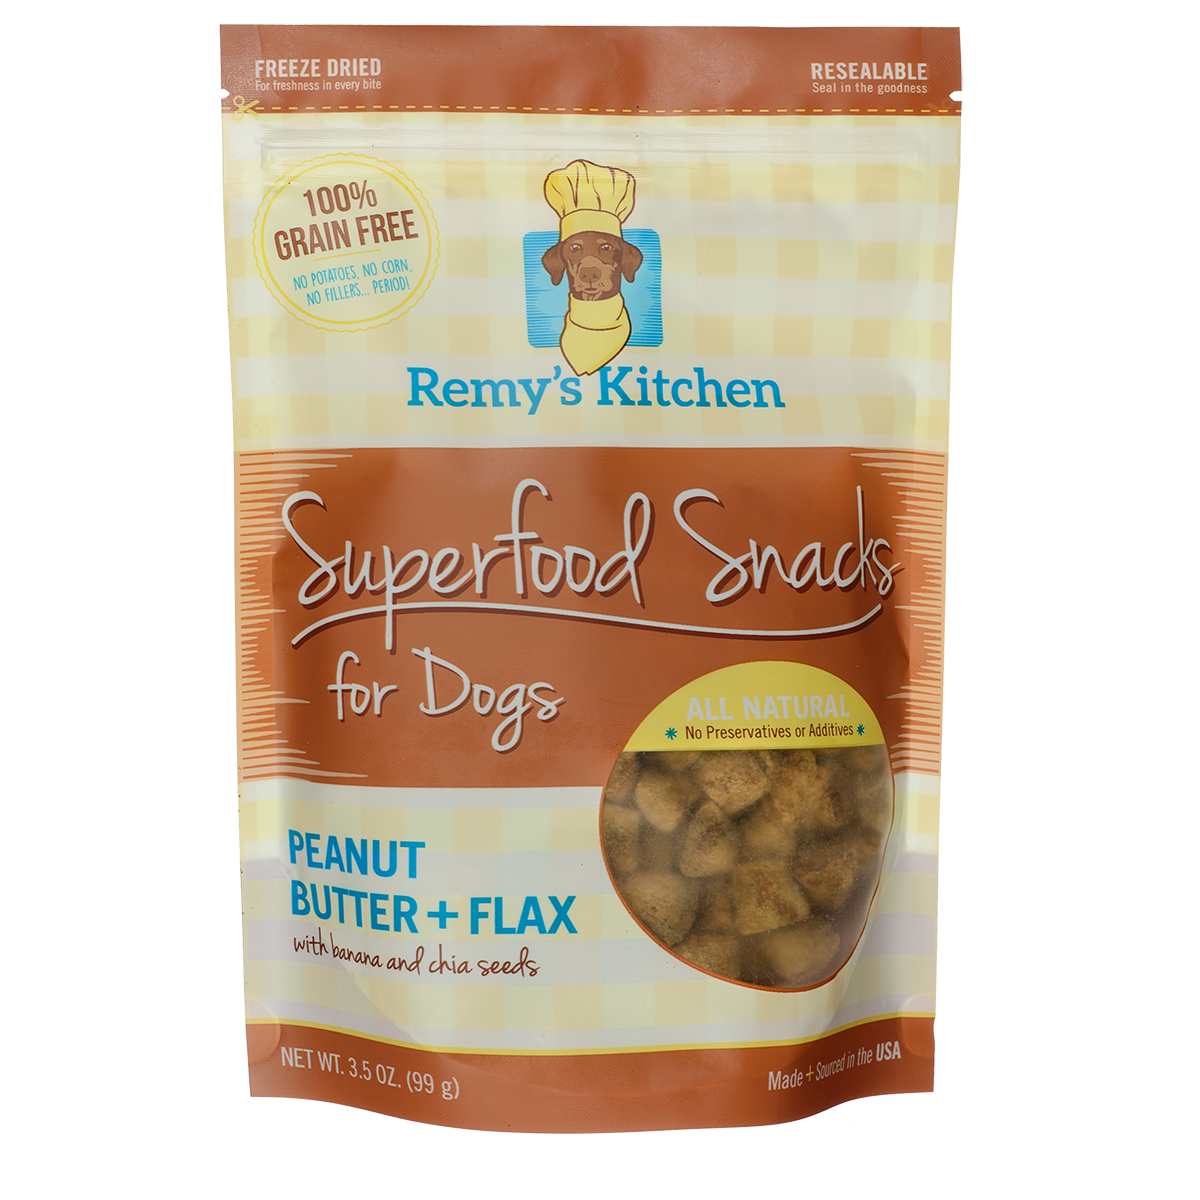 Peanut Butter + Flax Superfood Snacks are Here!